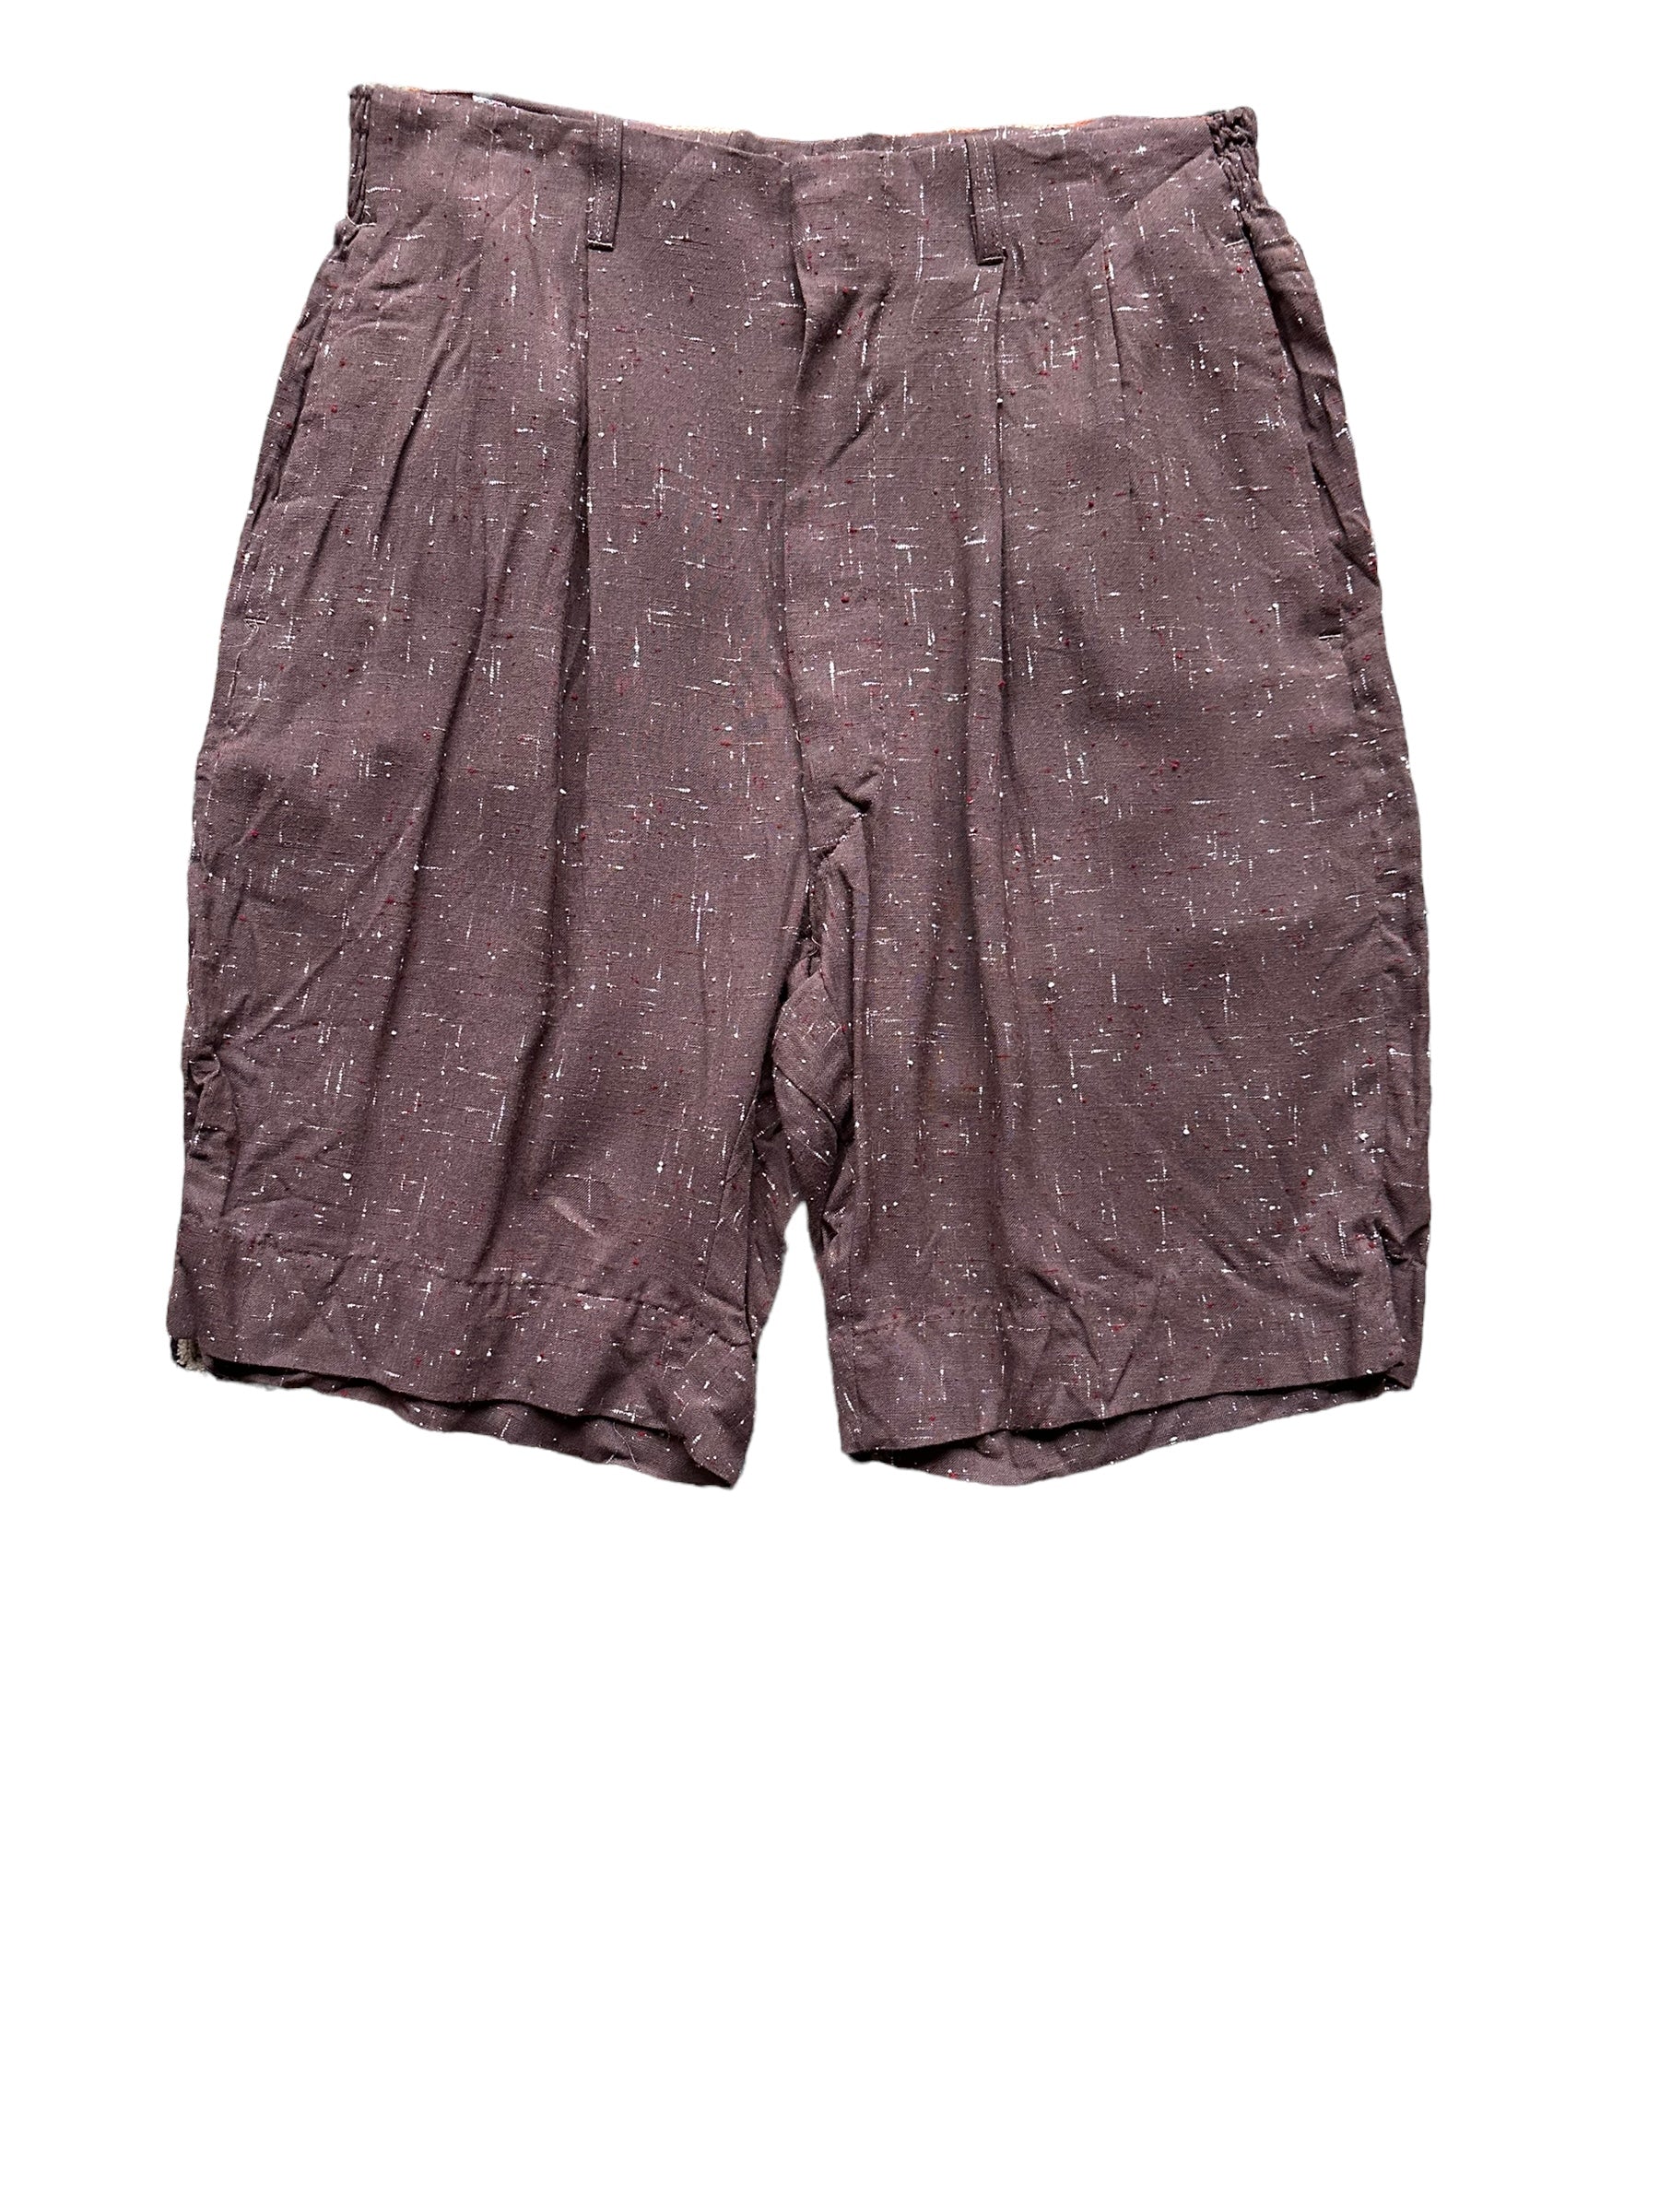 Front View of Vintage Atomic Fleck Rayon Shorts W30 |  Barn Owl Vintage Goods | Vintage Shorts Seattle